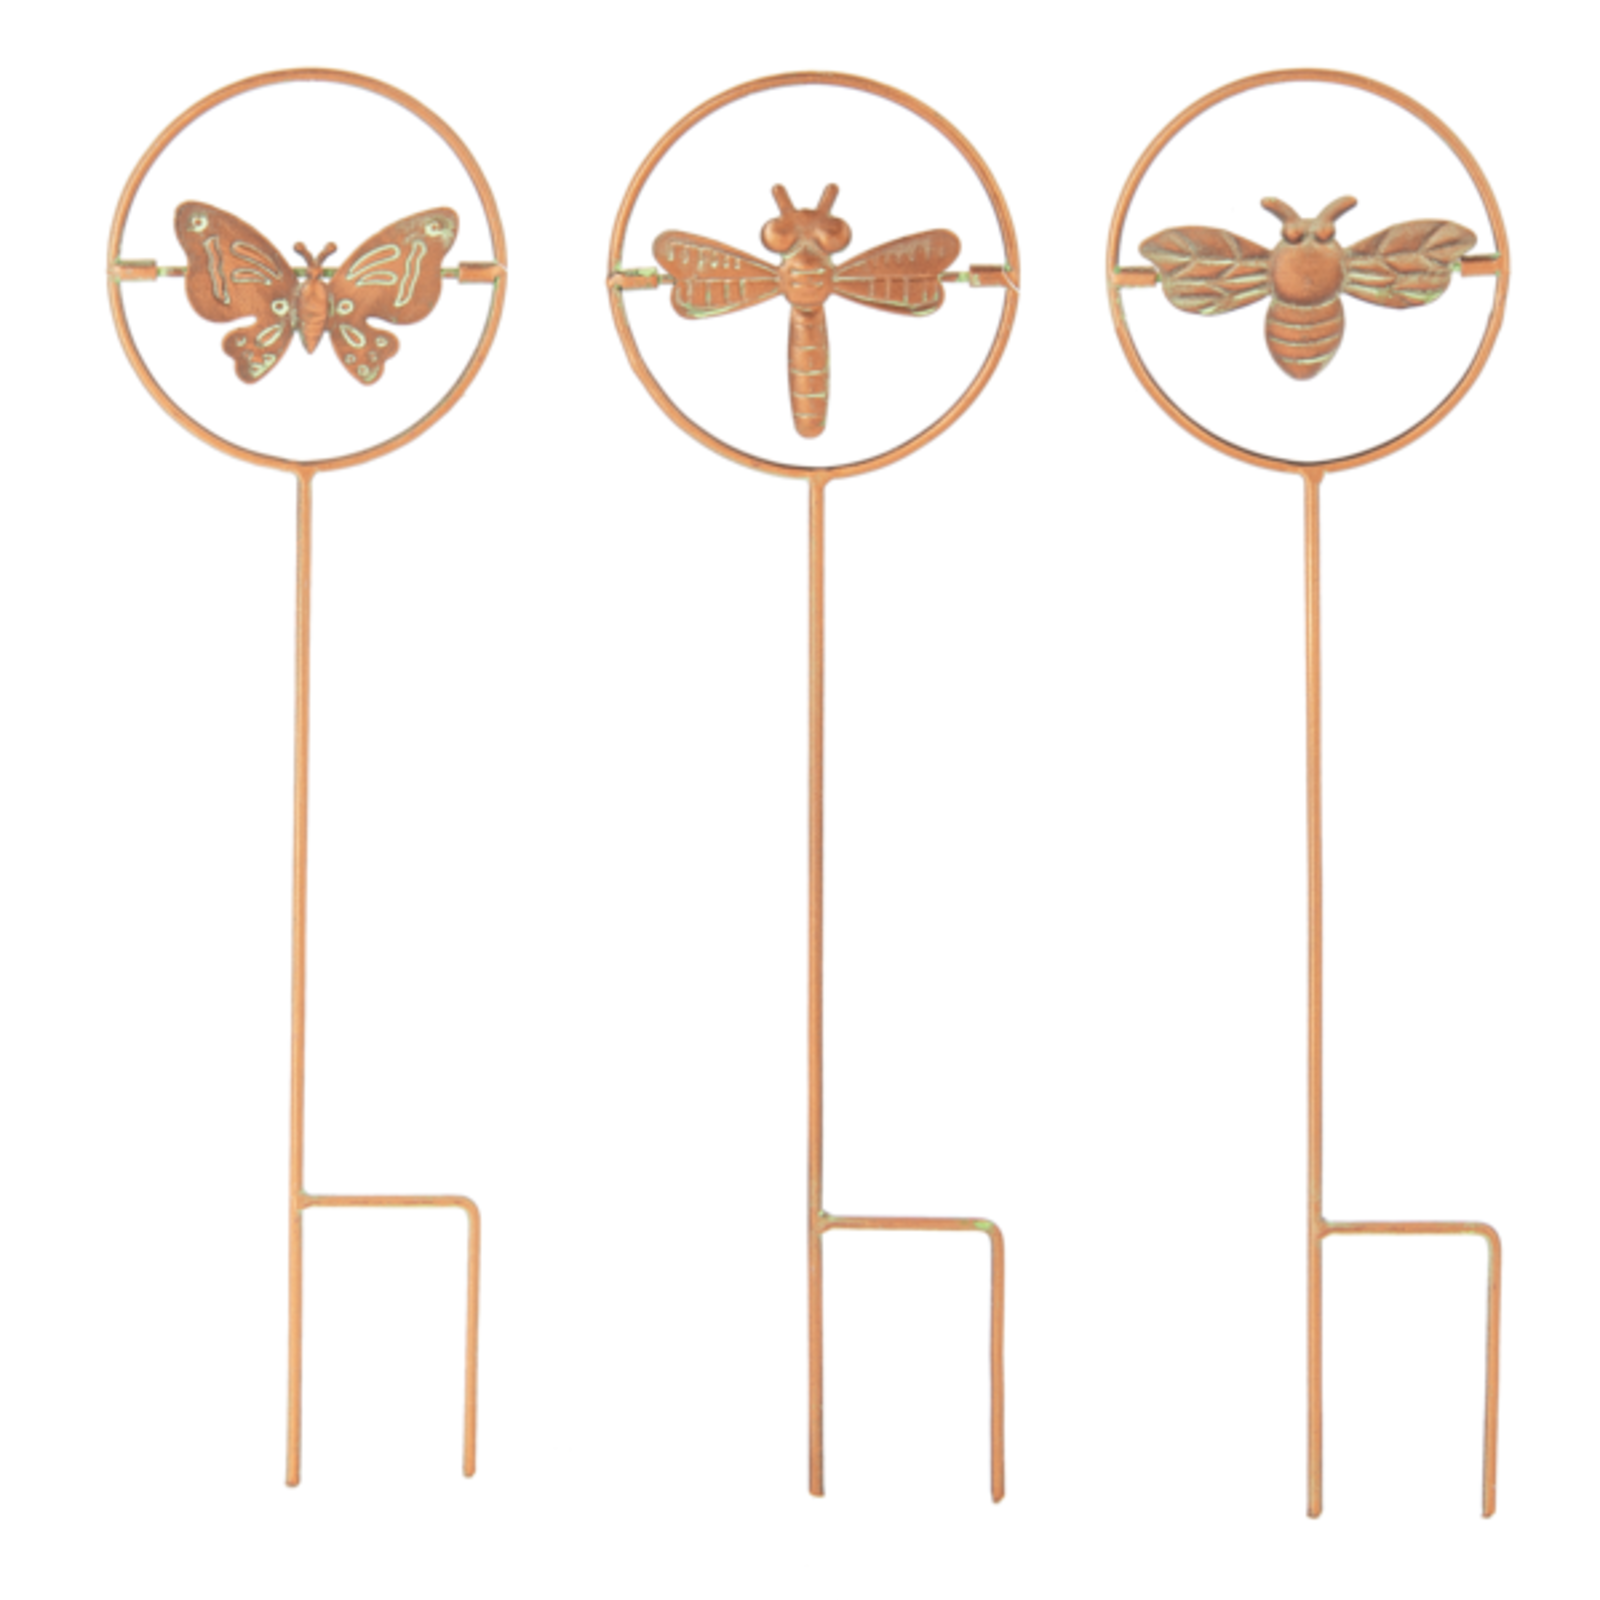 Ganz Copper Patina Bee, Butterfly & Dragonfly Mini Kinetic Garden Stake    CG177385 loading=